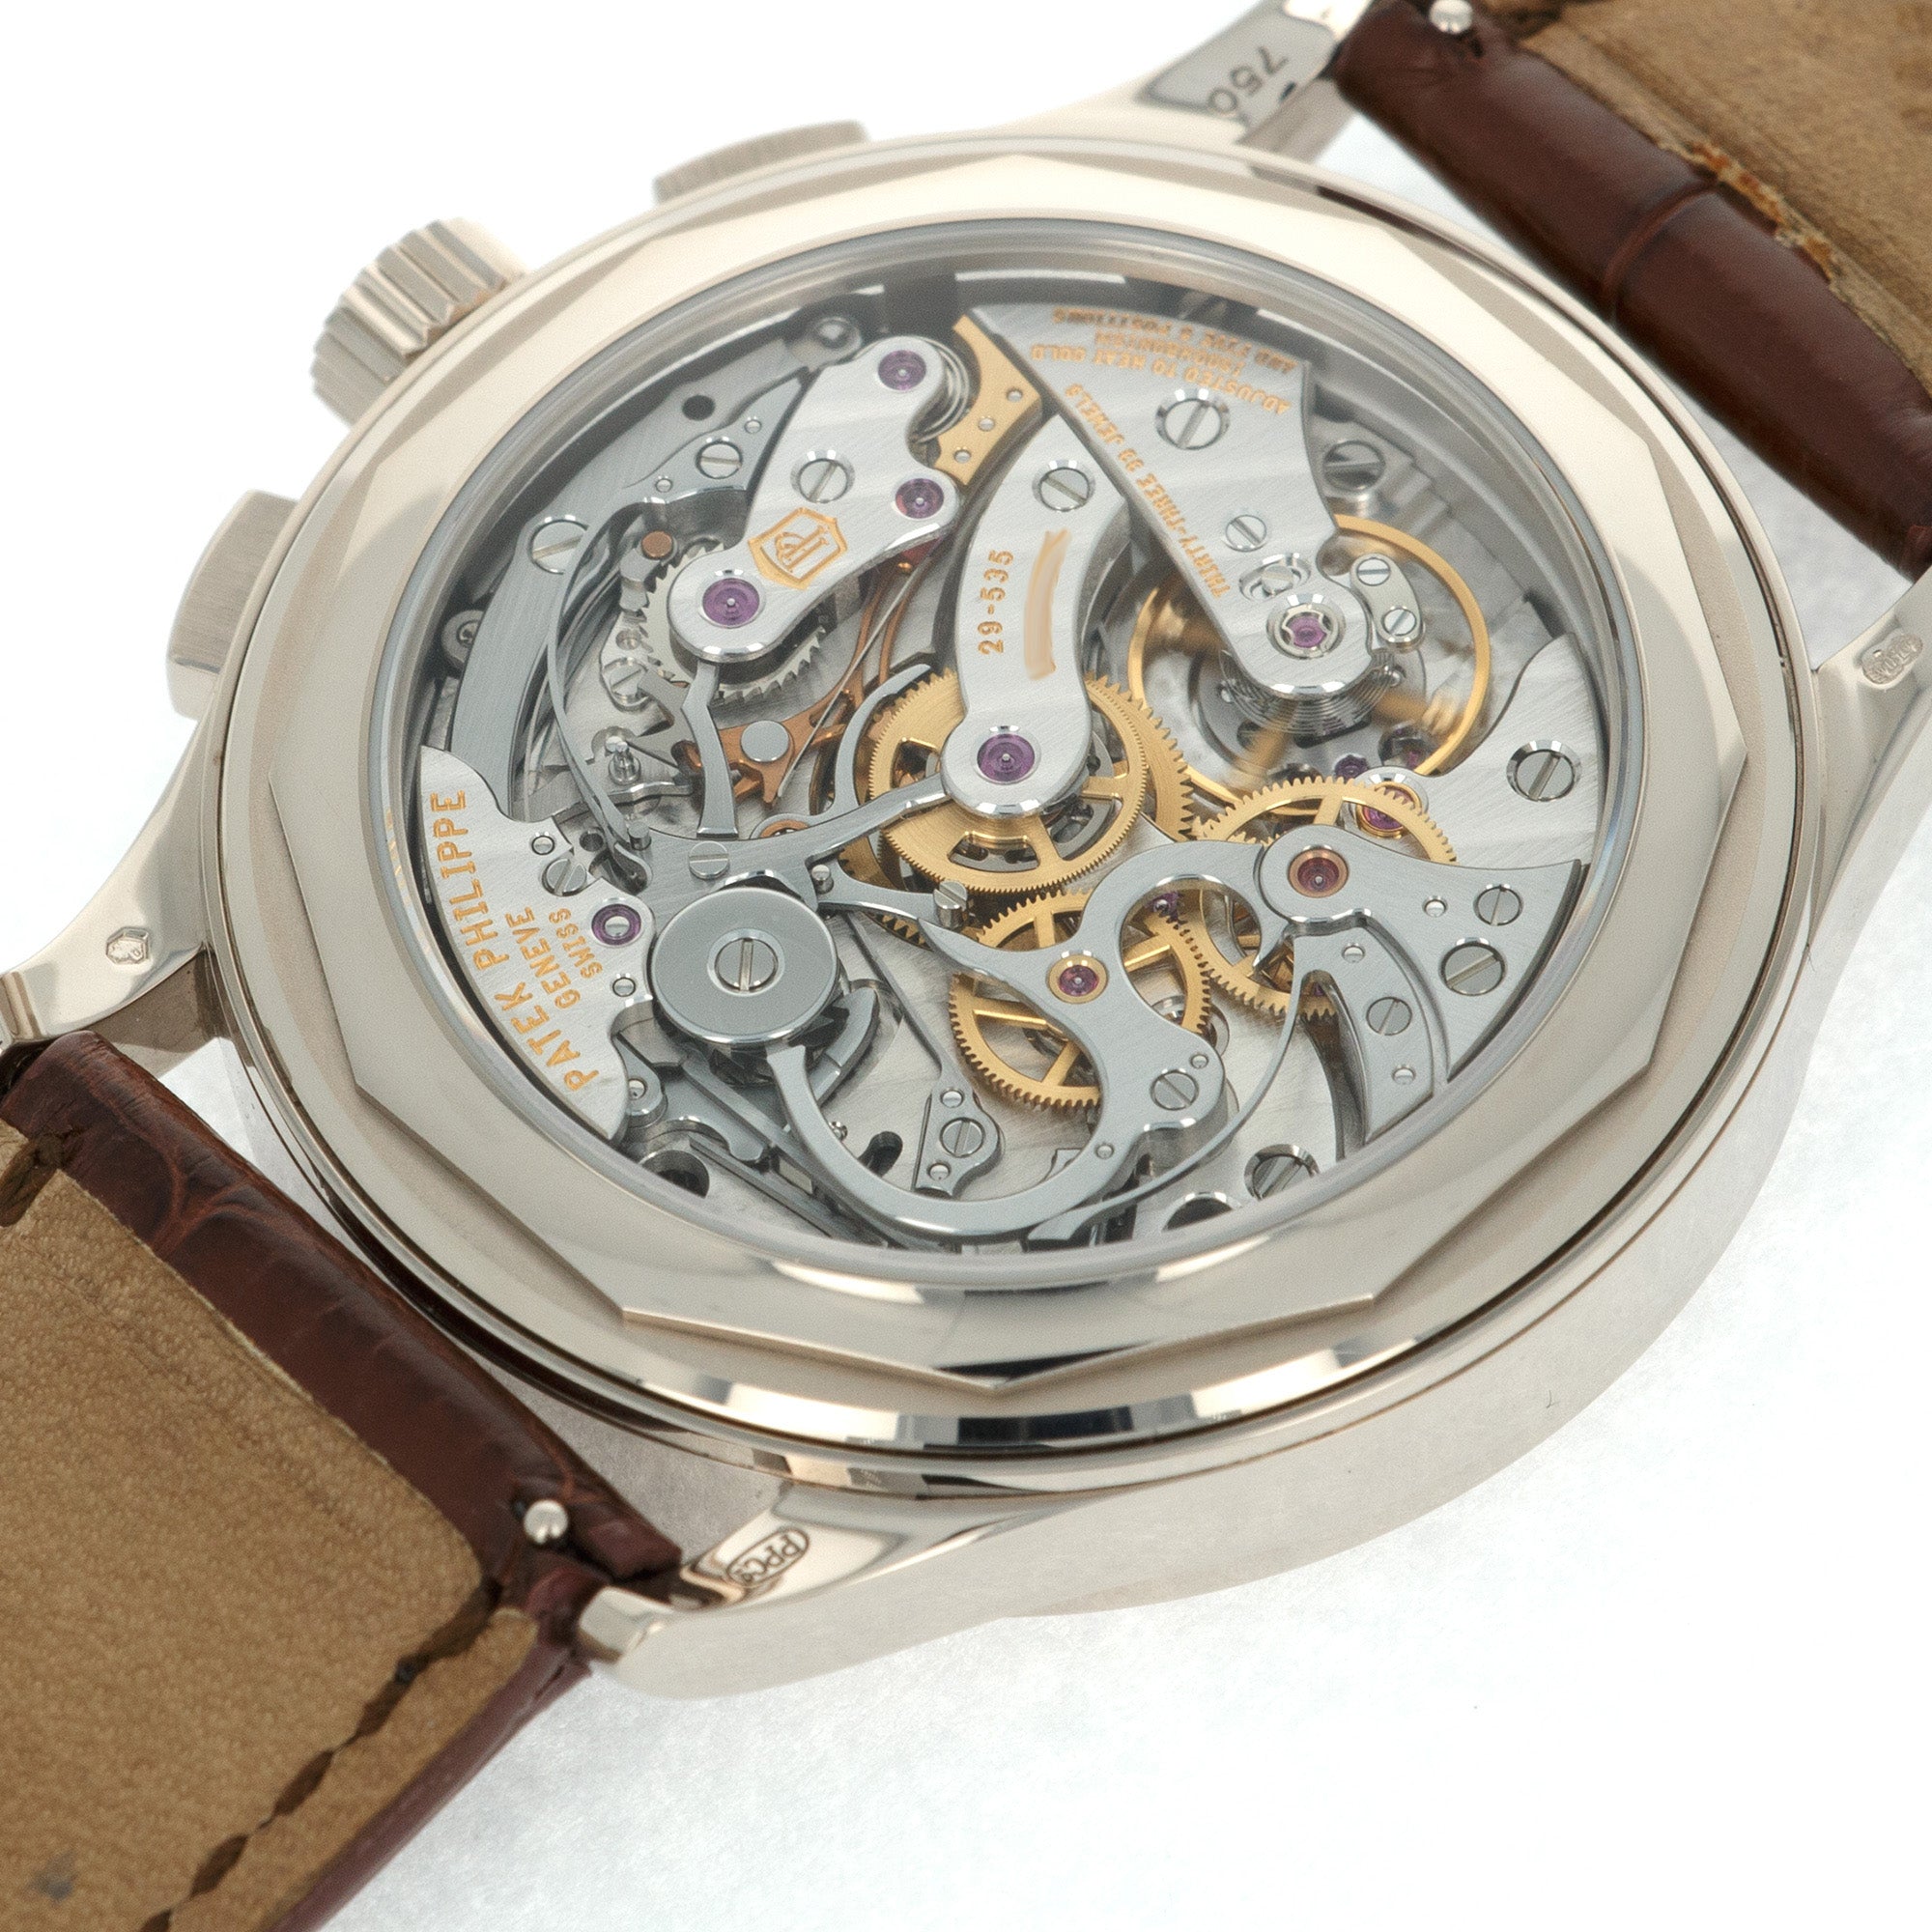 Patek Philippe White Gold Chronograph Ref. 5170, Retailed by Tiffany &amp; Co.